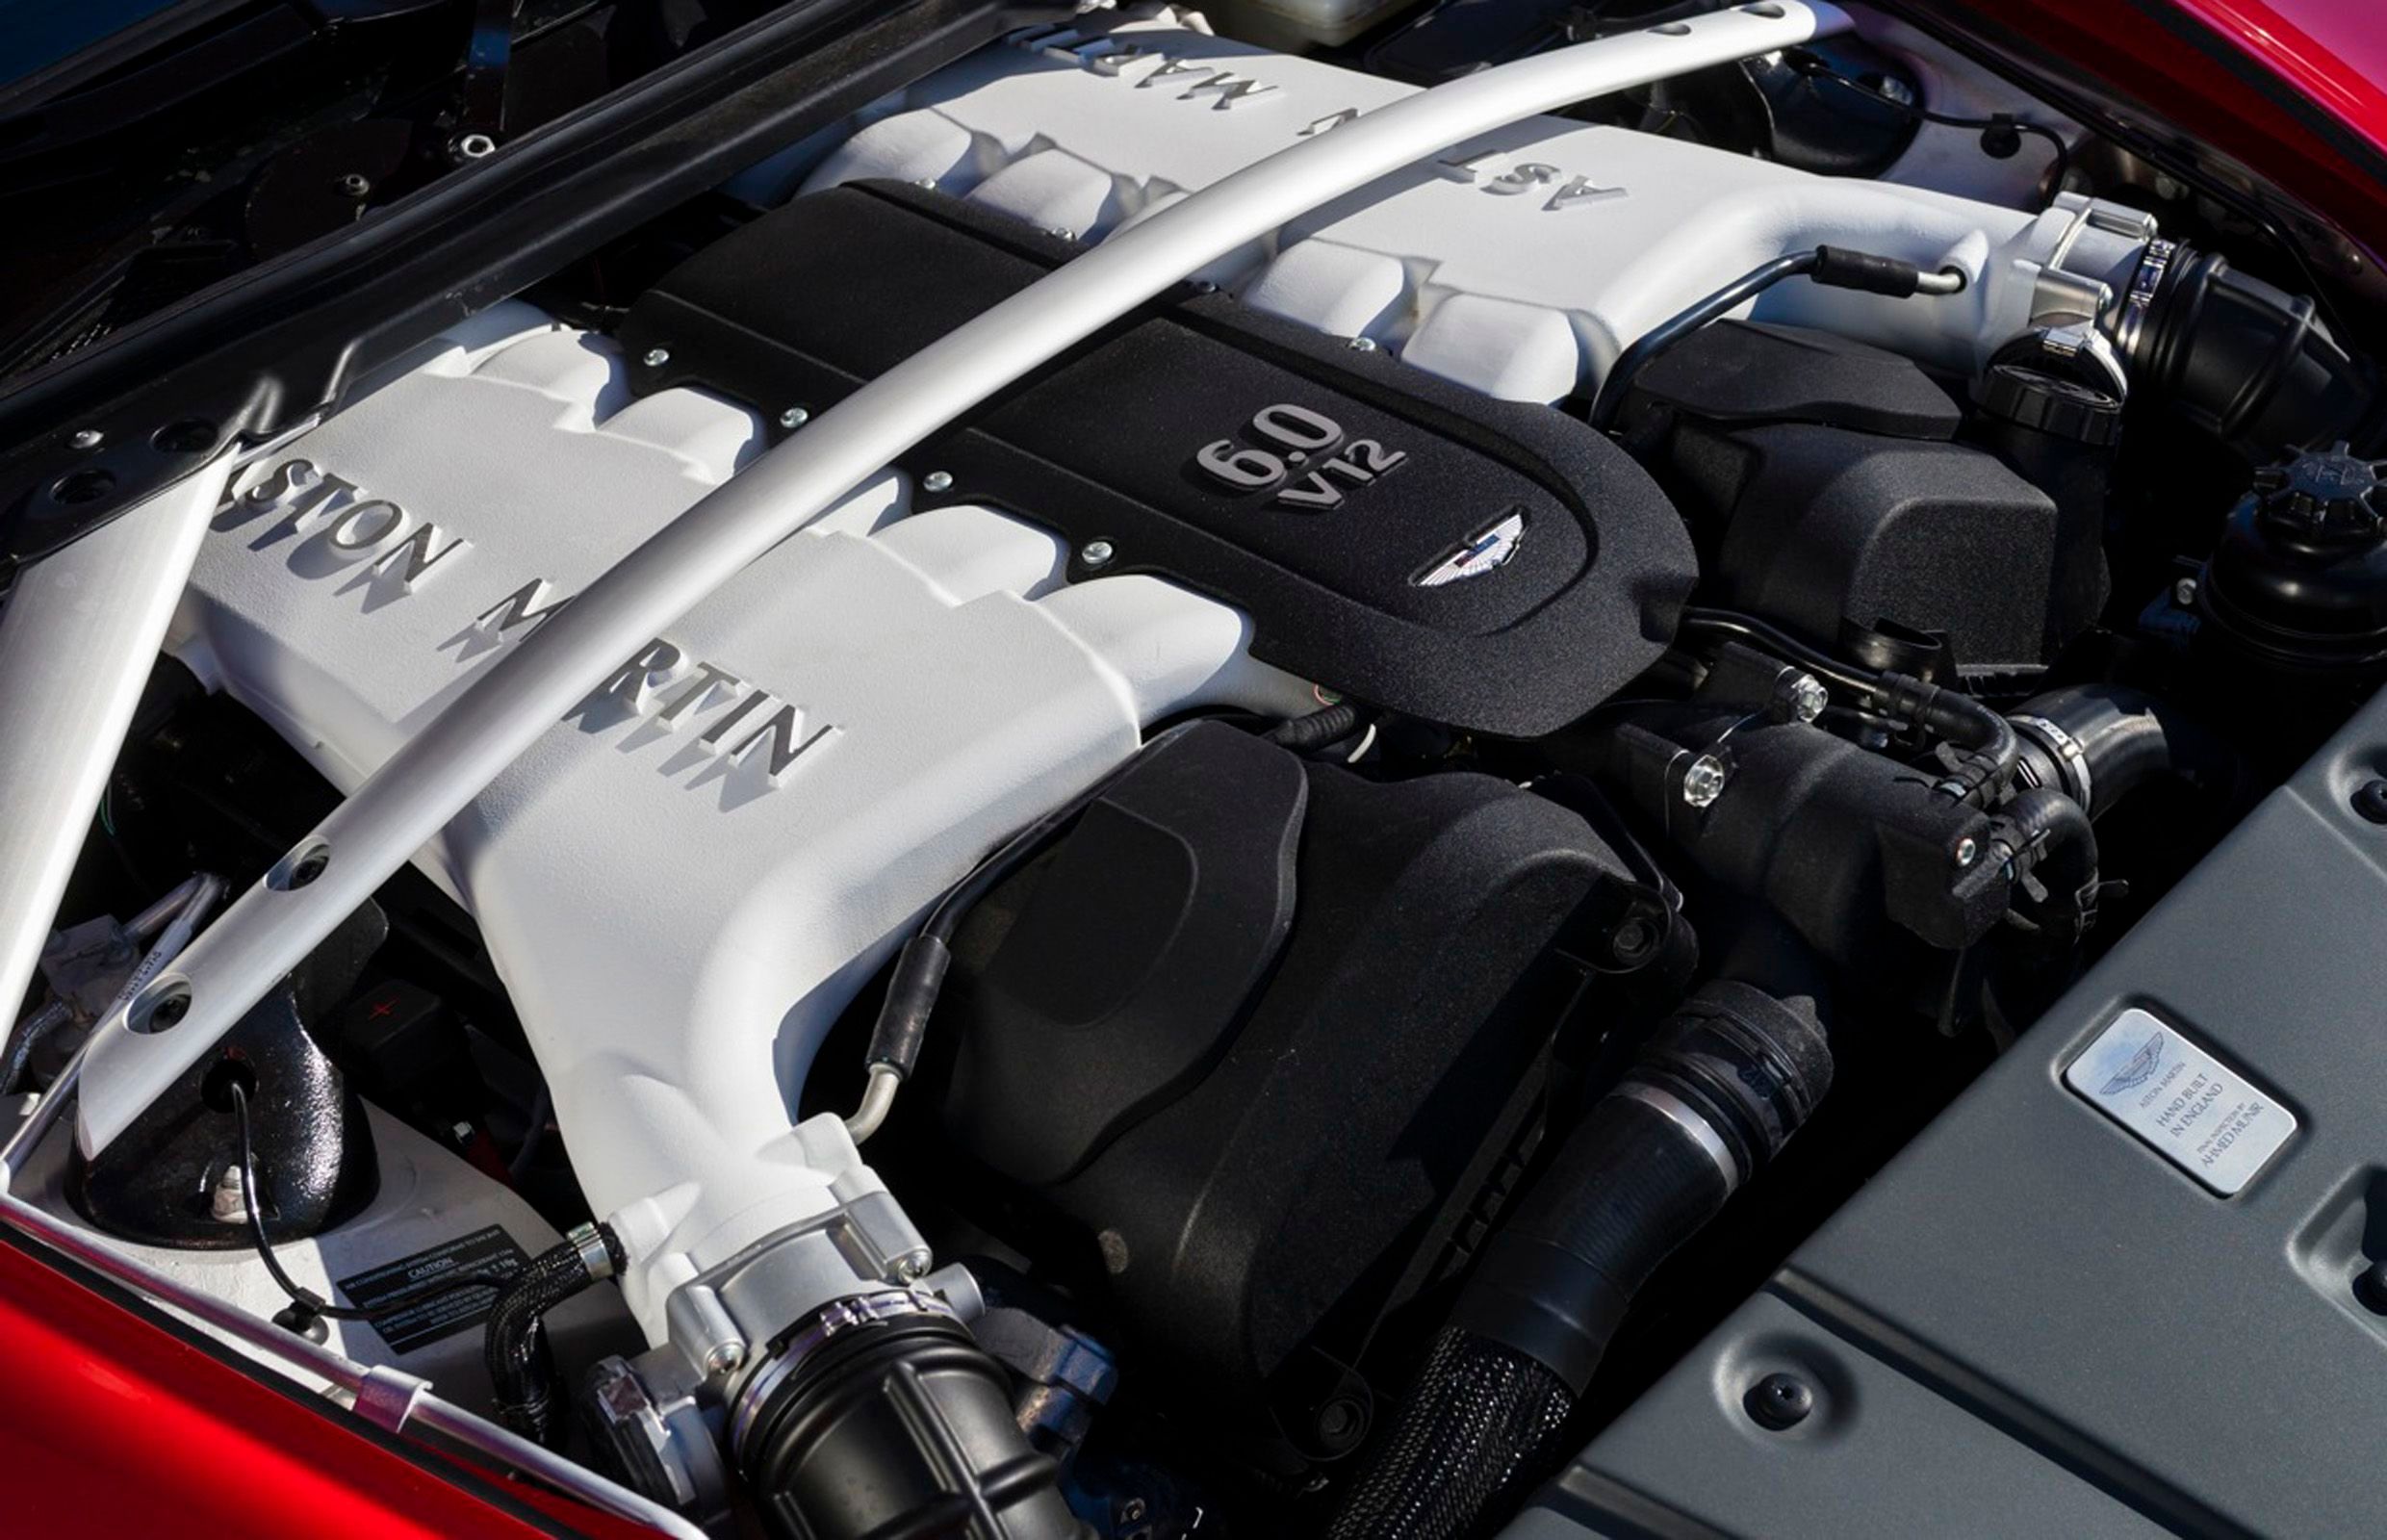 V6 Engine- Its Compact Size Helps When Designing A New Car